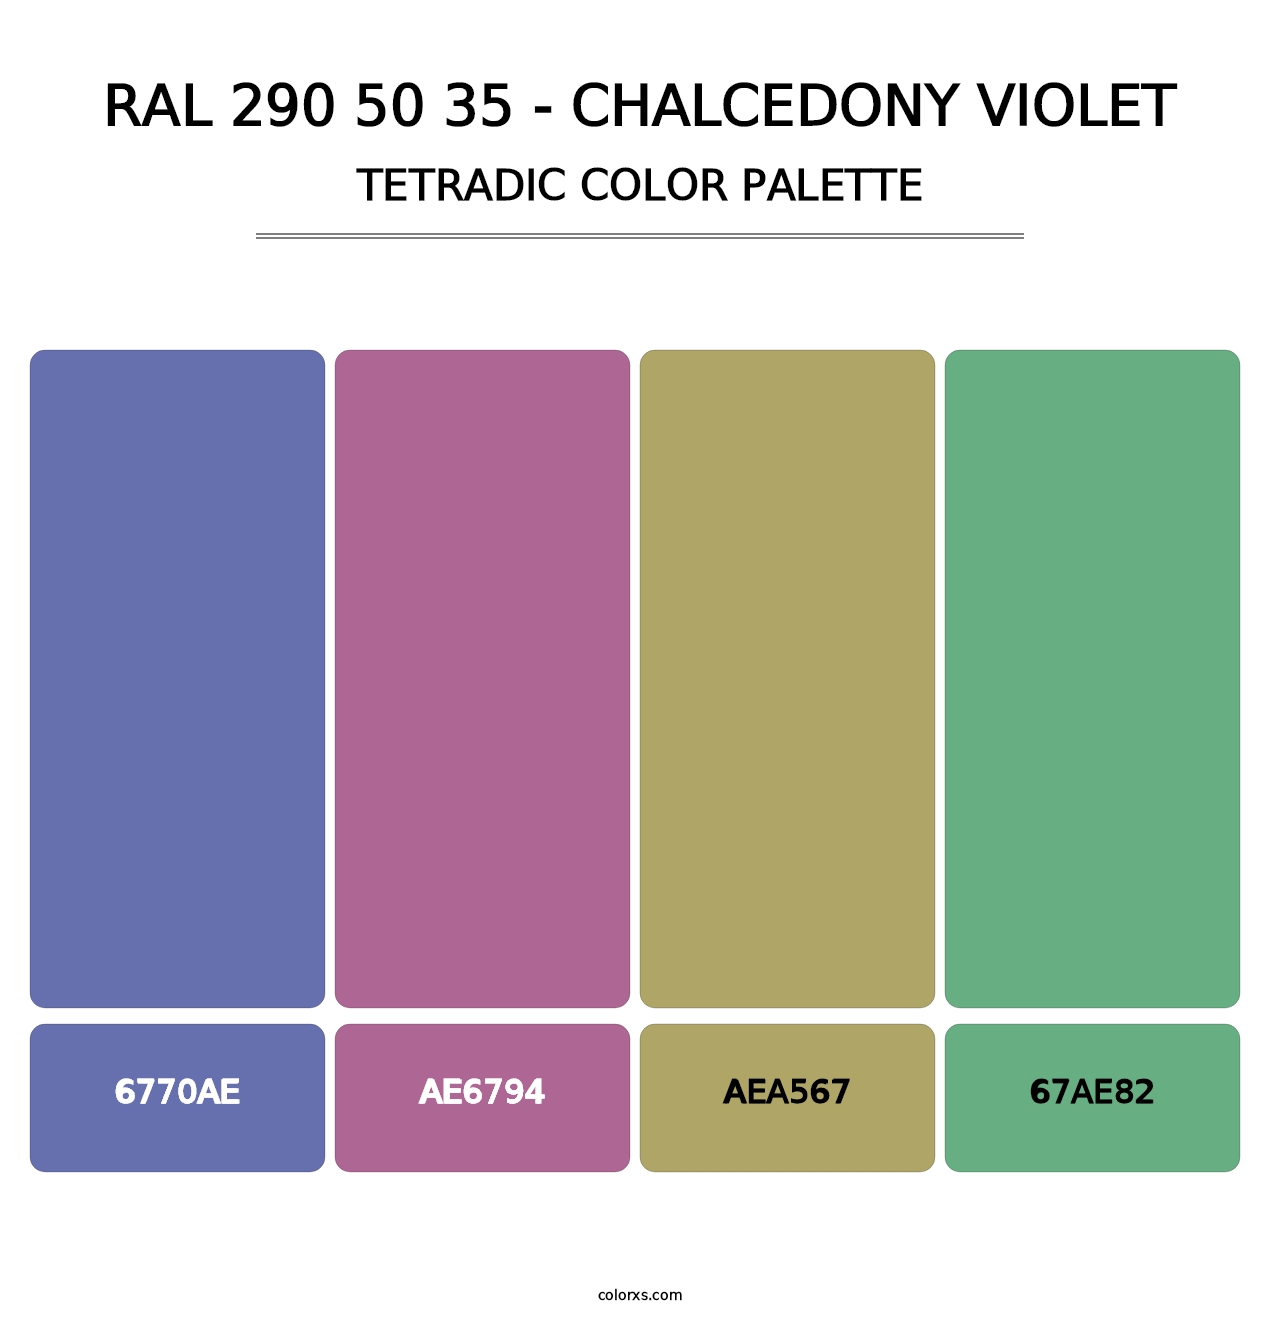 RAL 290 50 35 - Chalcedony Violet - Tetradic Color Palette